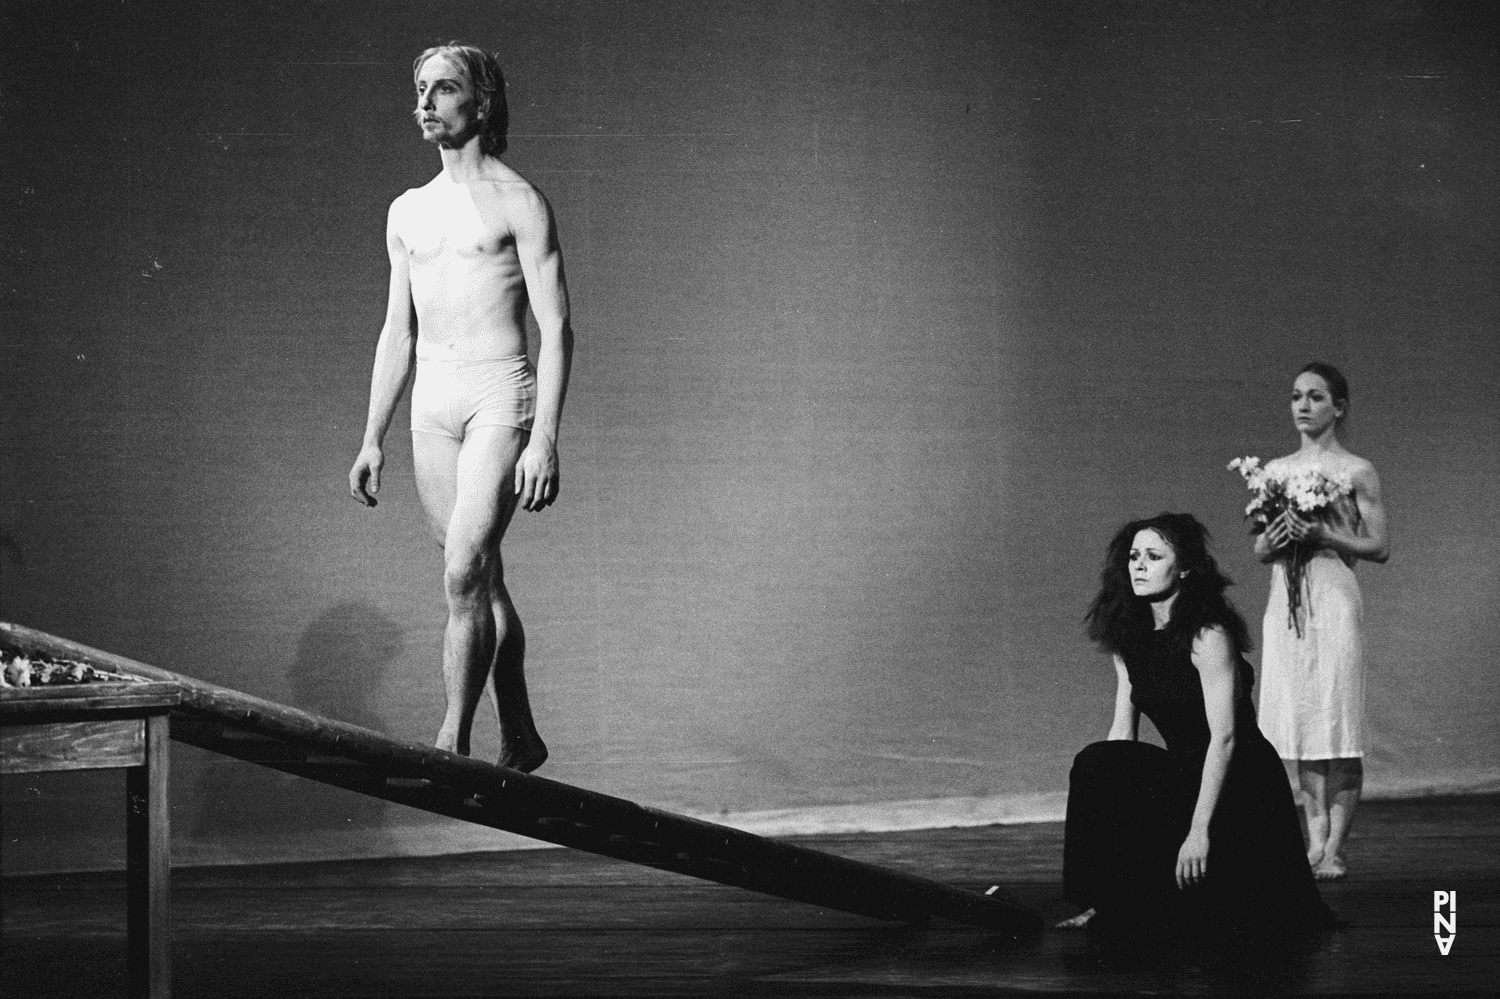 Dominique Mercy, Vivienne Newport and Malou Airaudo in “Iphigenie auf Tauris” by Pina Bausch with Tanztheater Wuppertal at Opernhaus Wuppertal (Germany), April 20, 1974